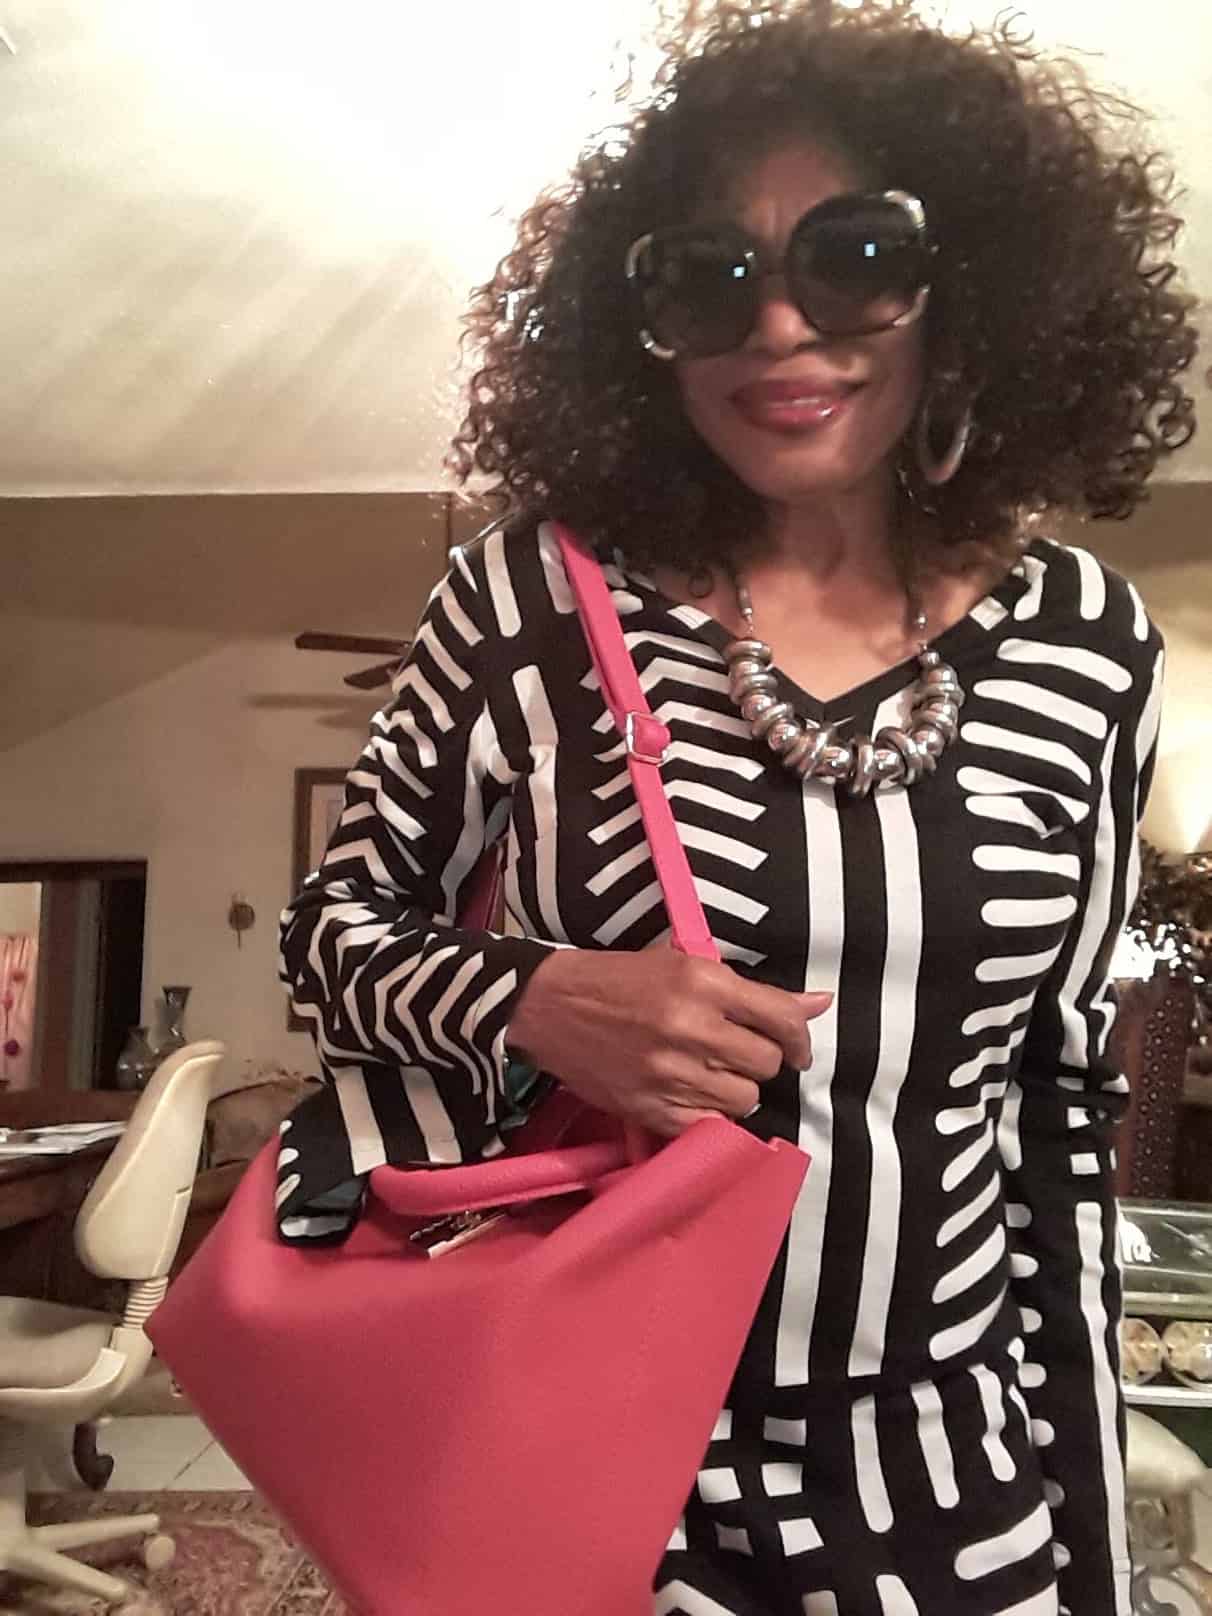 Ashro Woman of the Week, Lucy, a black woman in a black and white dress, sunglasses, with a coral shoulder bag.